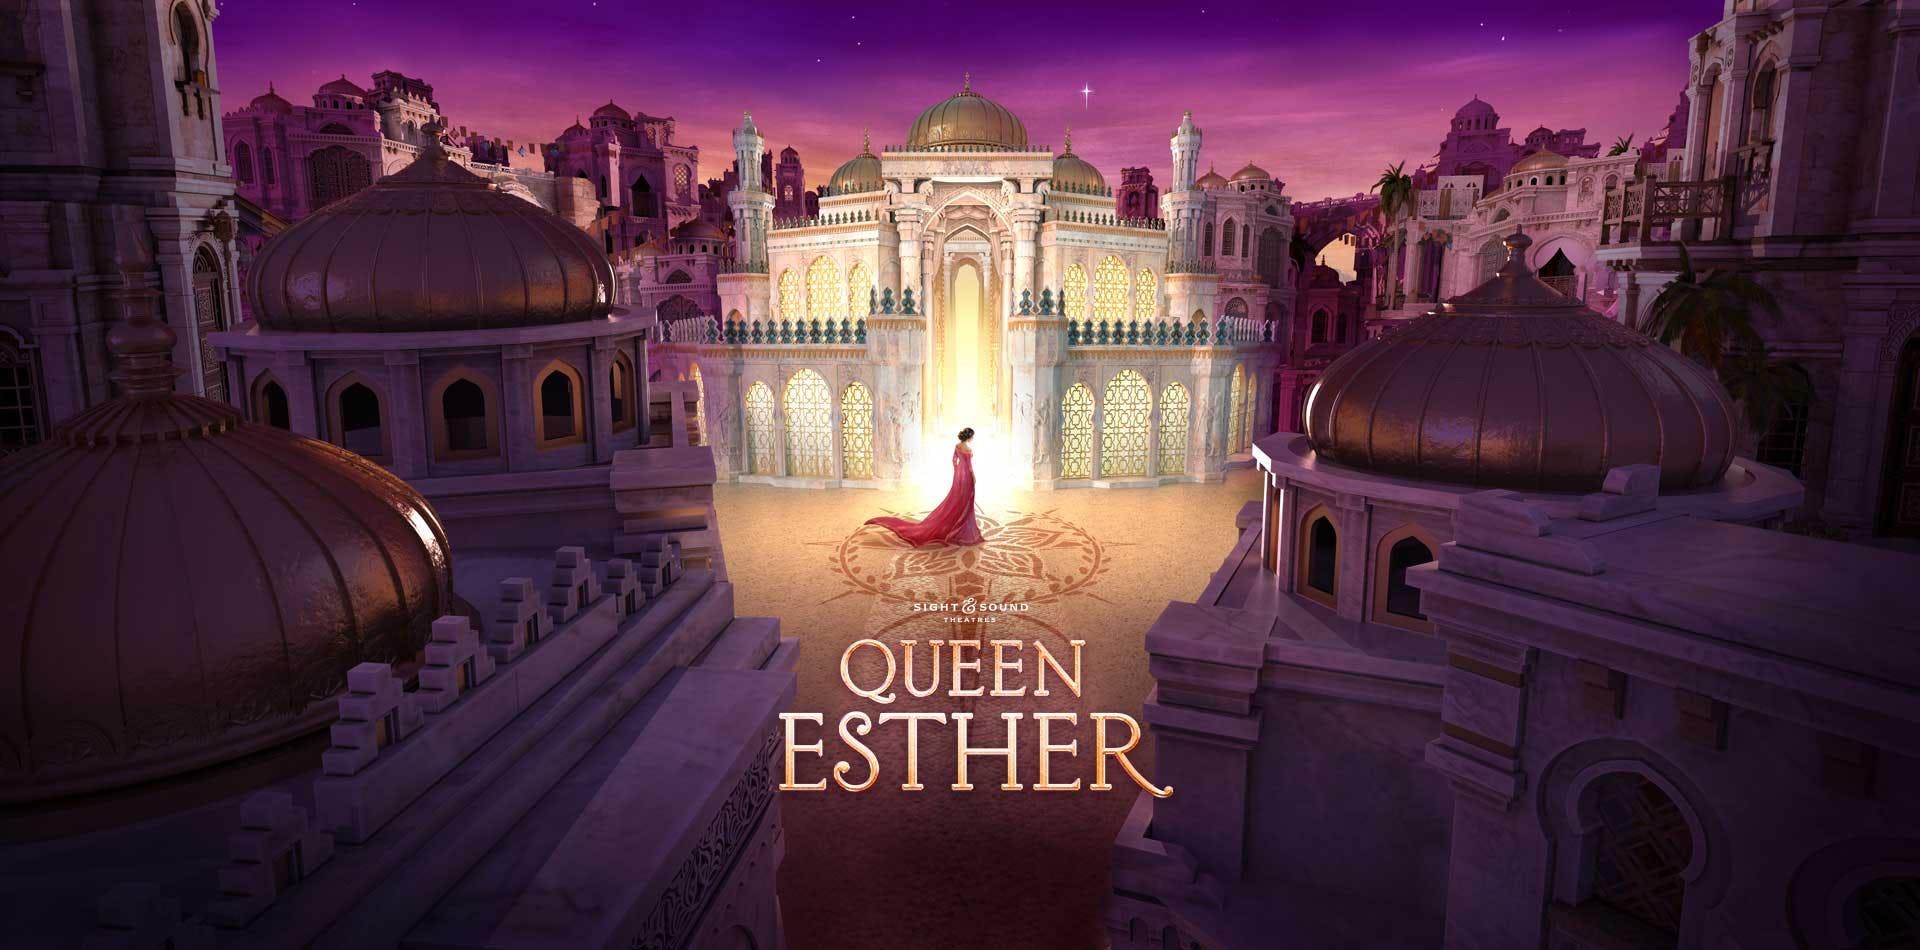 Queen Esther Sights & Sounds Theater Lancaster, PA